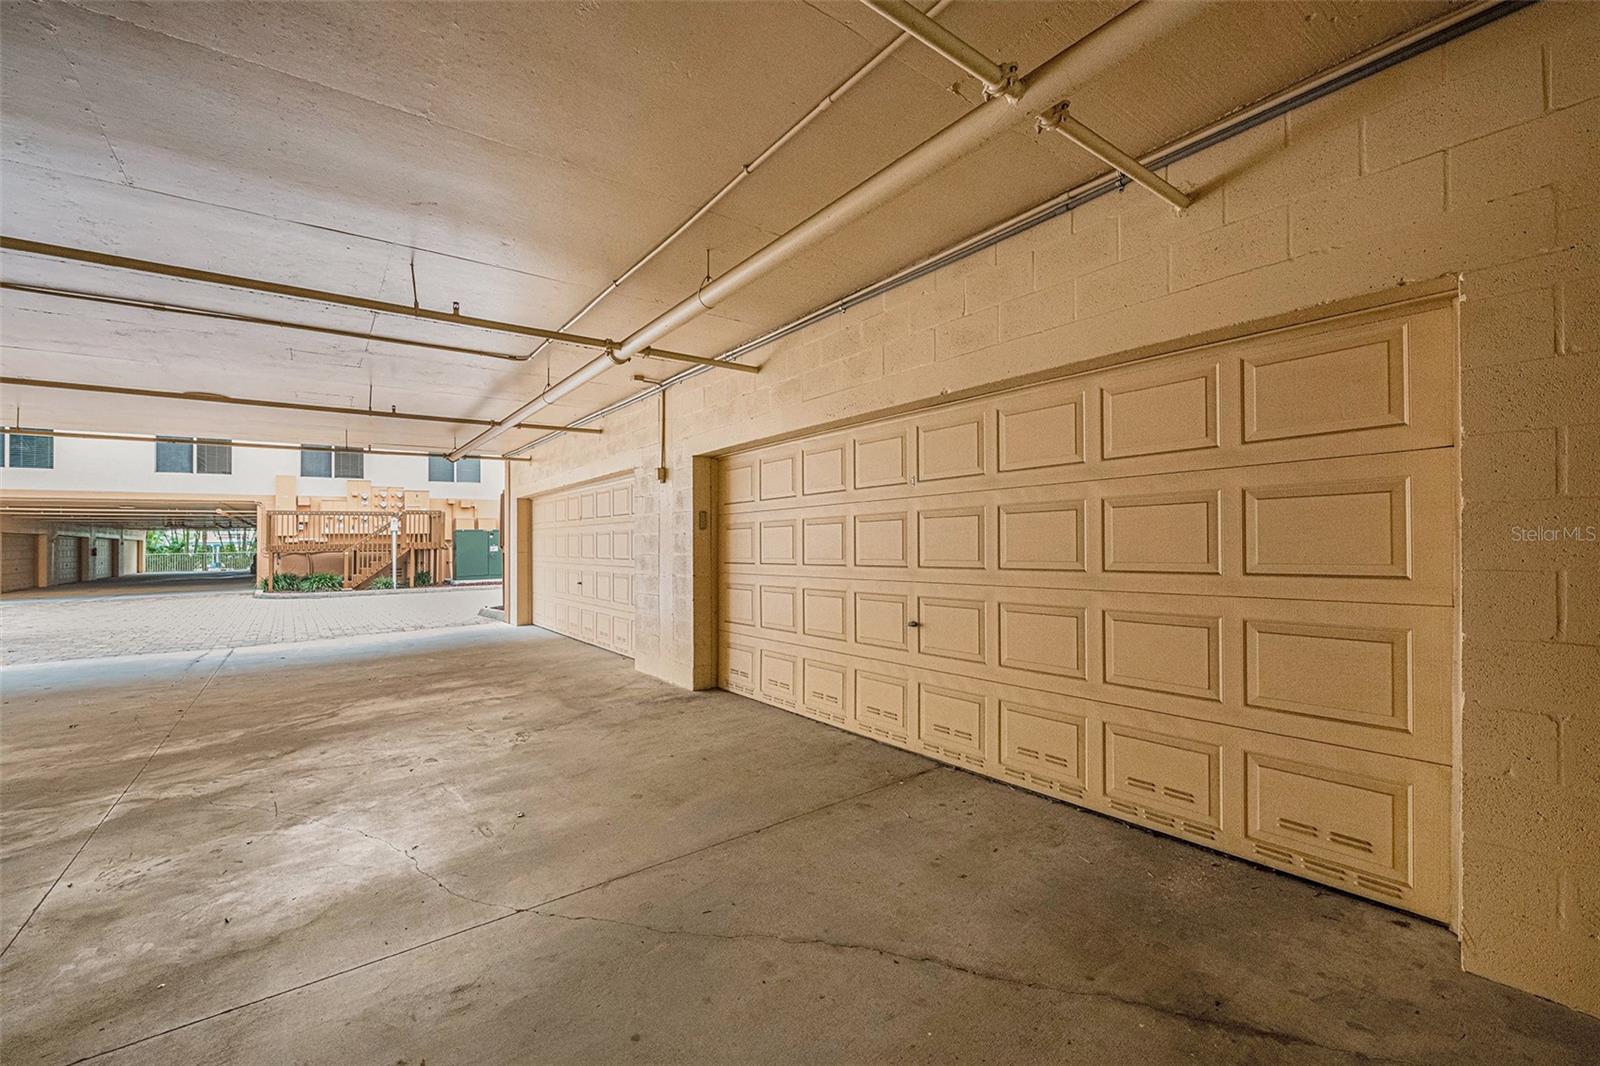 Perfectly located two car garage with access to the main lobby directly from the garage.